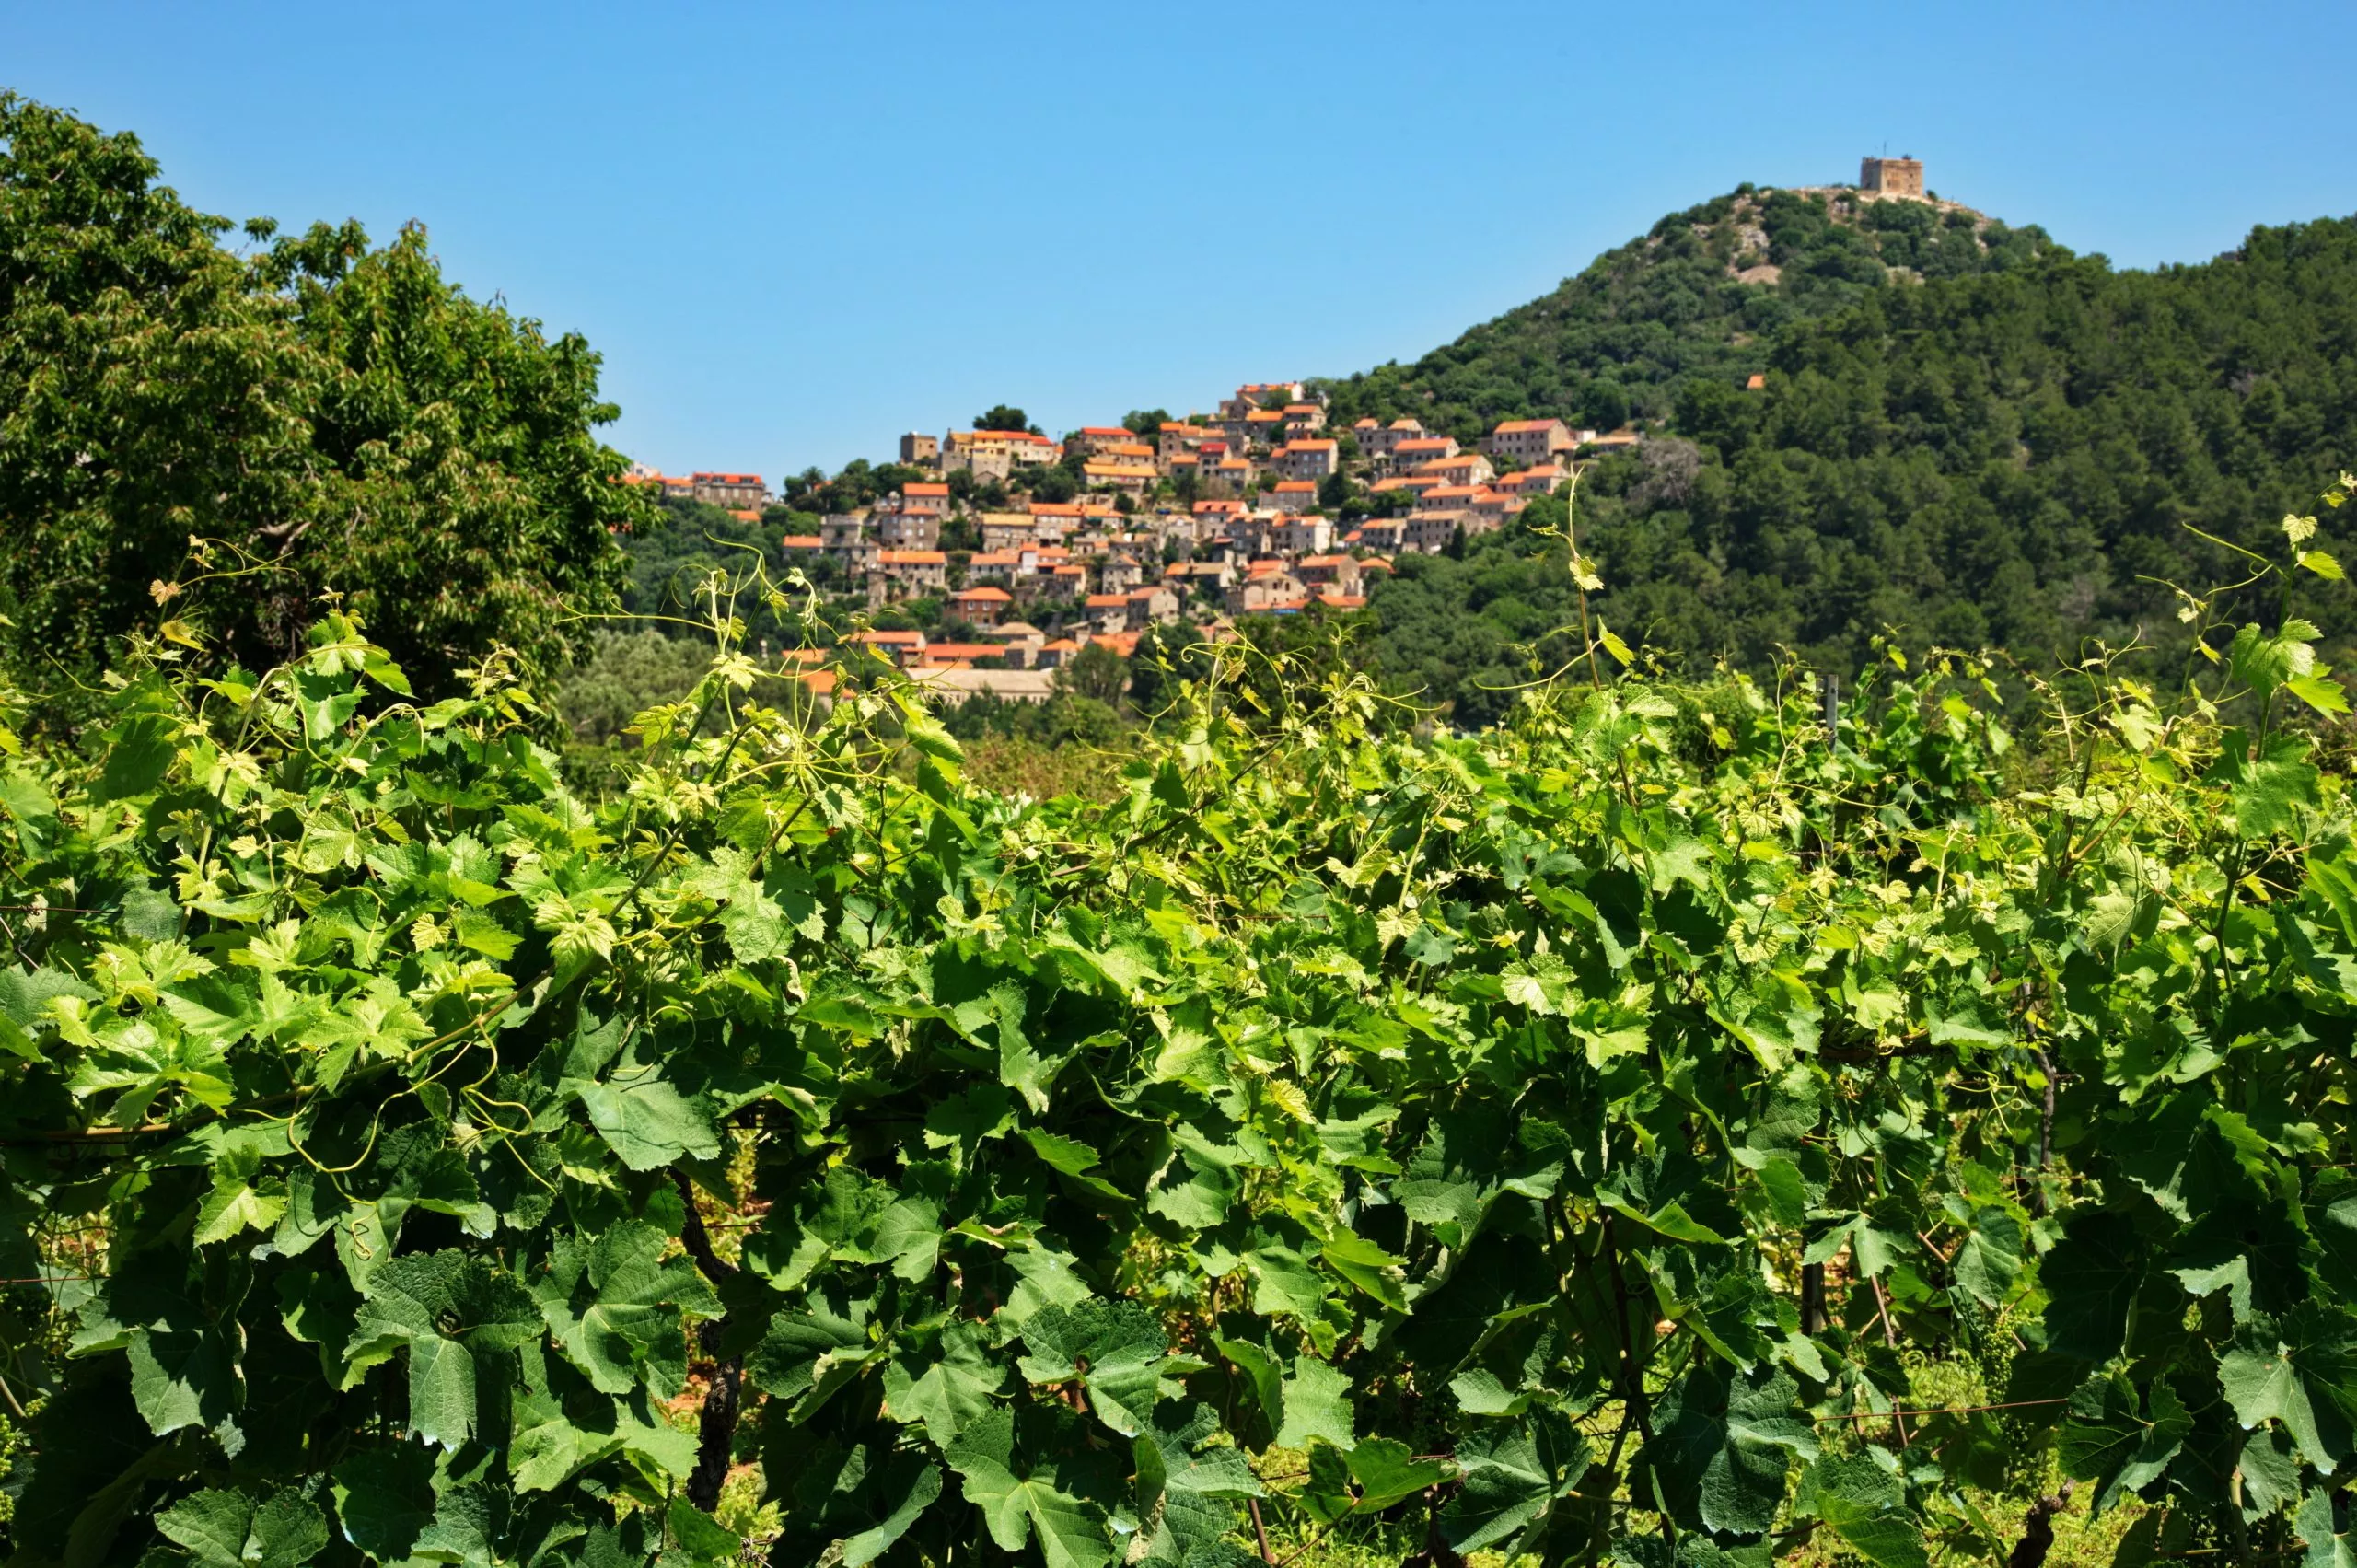 Vineyards in front of traditional homes in Lastovo, Croatia